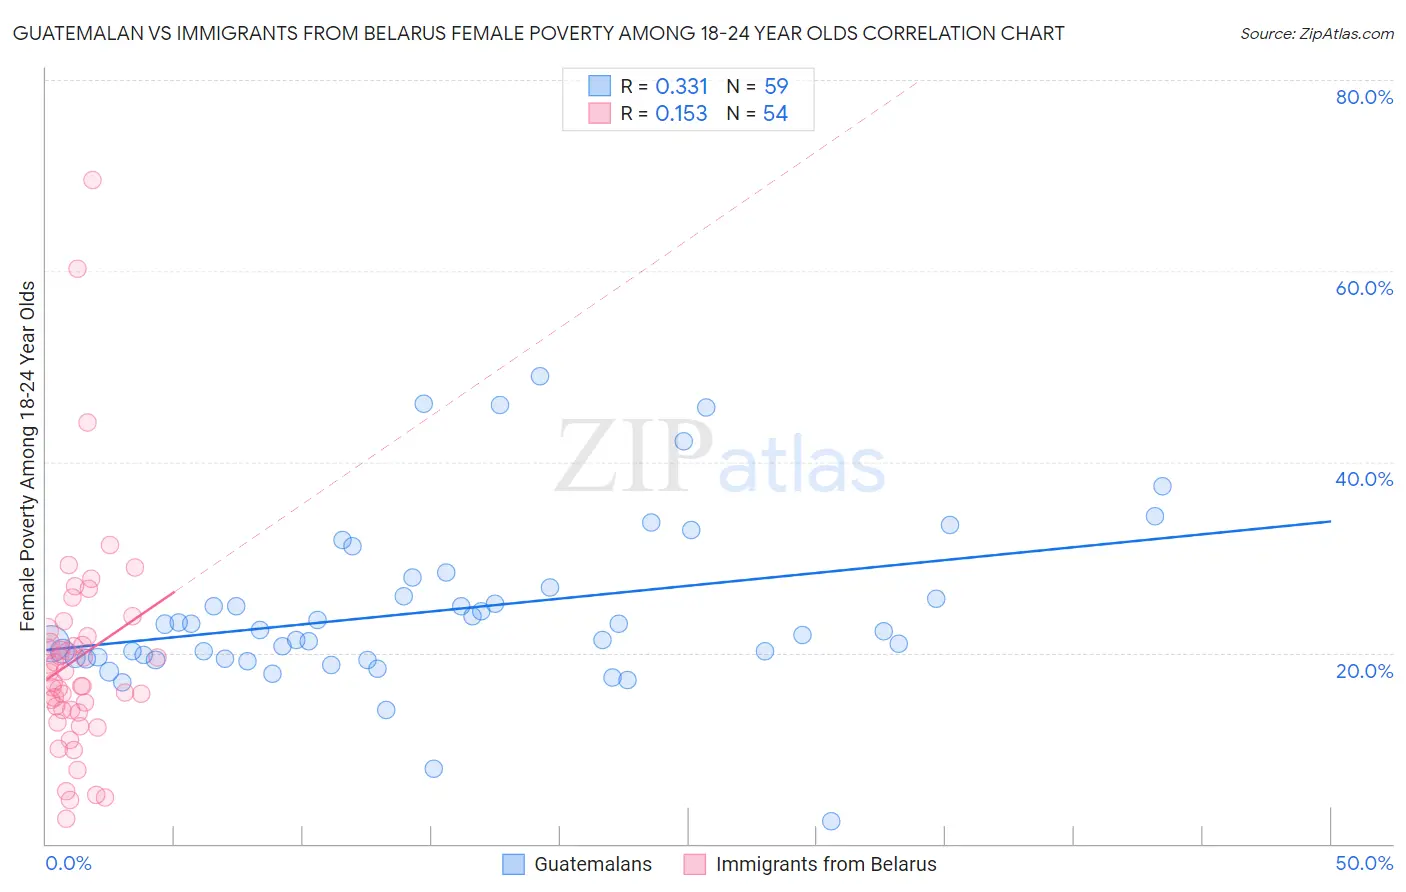 Guatemalan vs Immigrants from Belarus Female Poverty Among 18-24 Year Olds